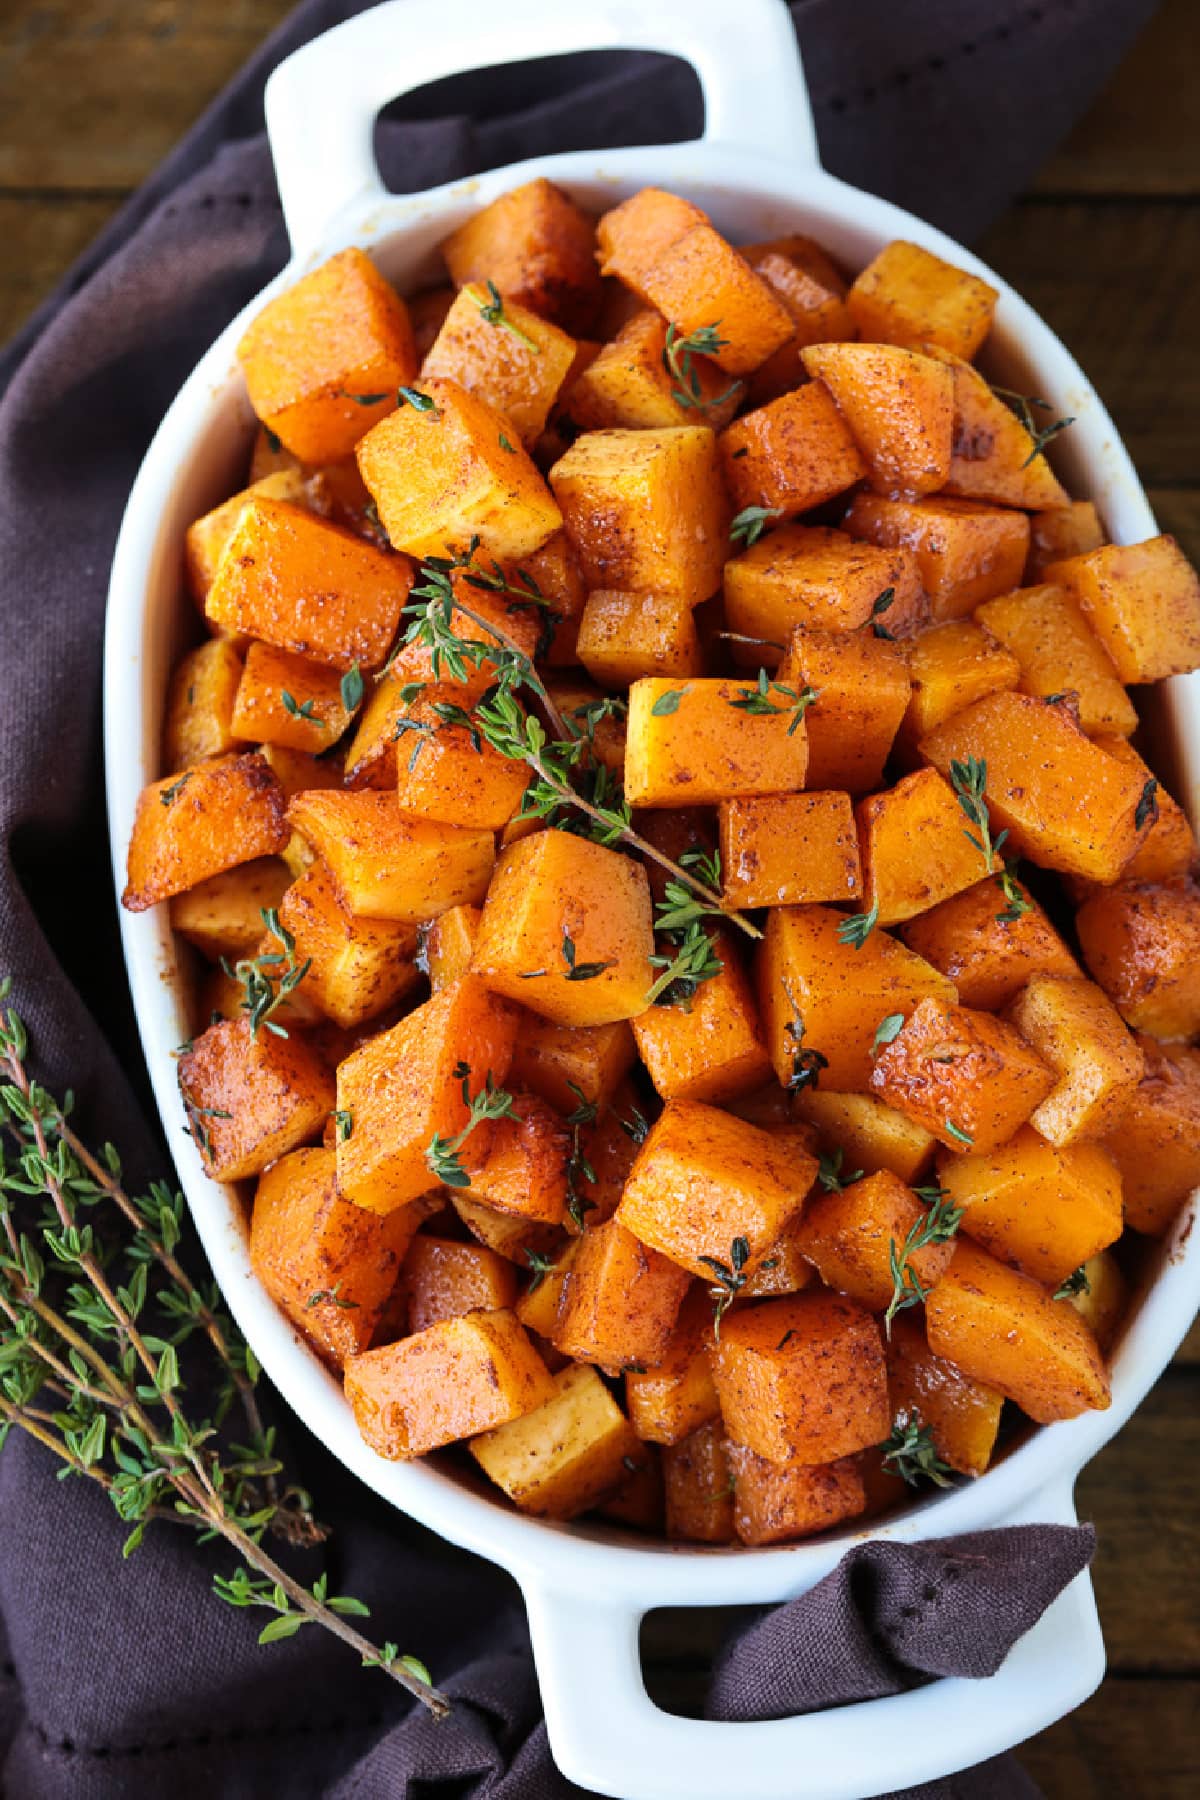 diced butternut squash in baking dish with thyme